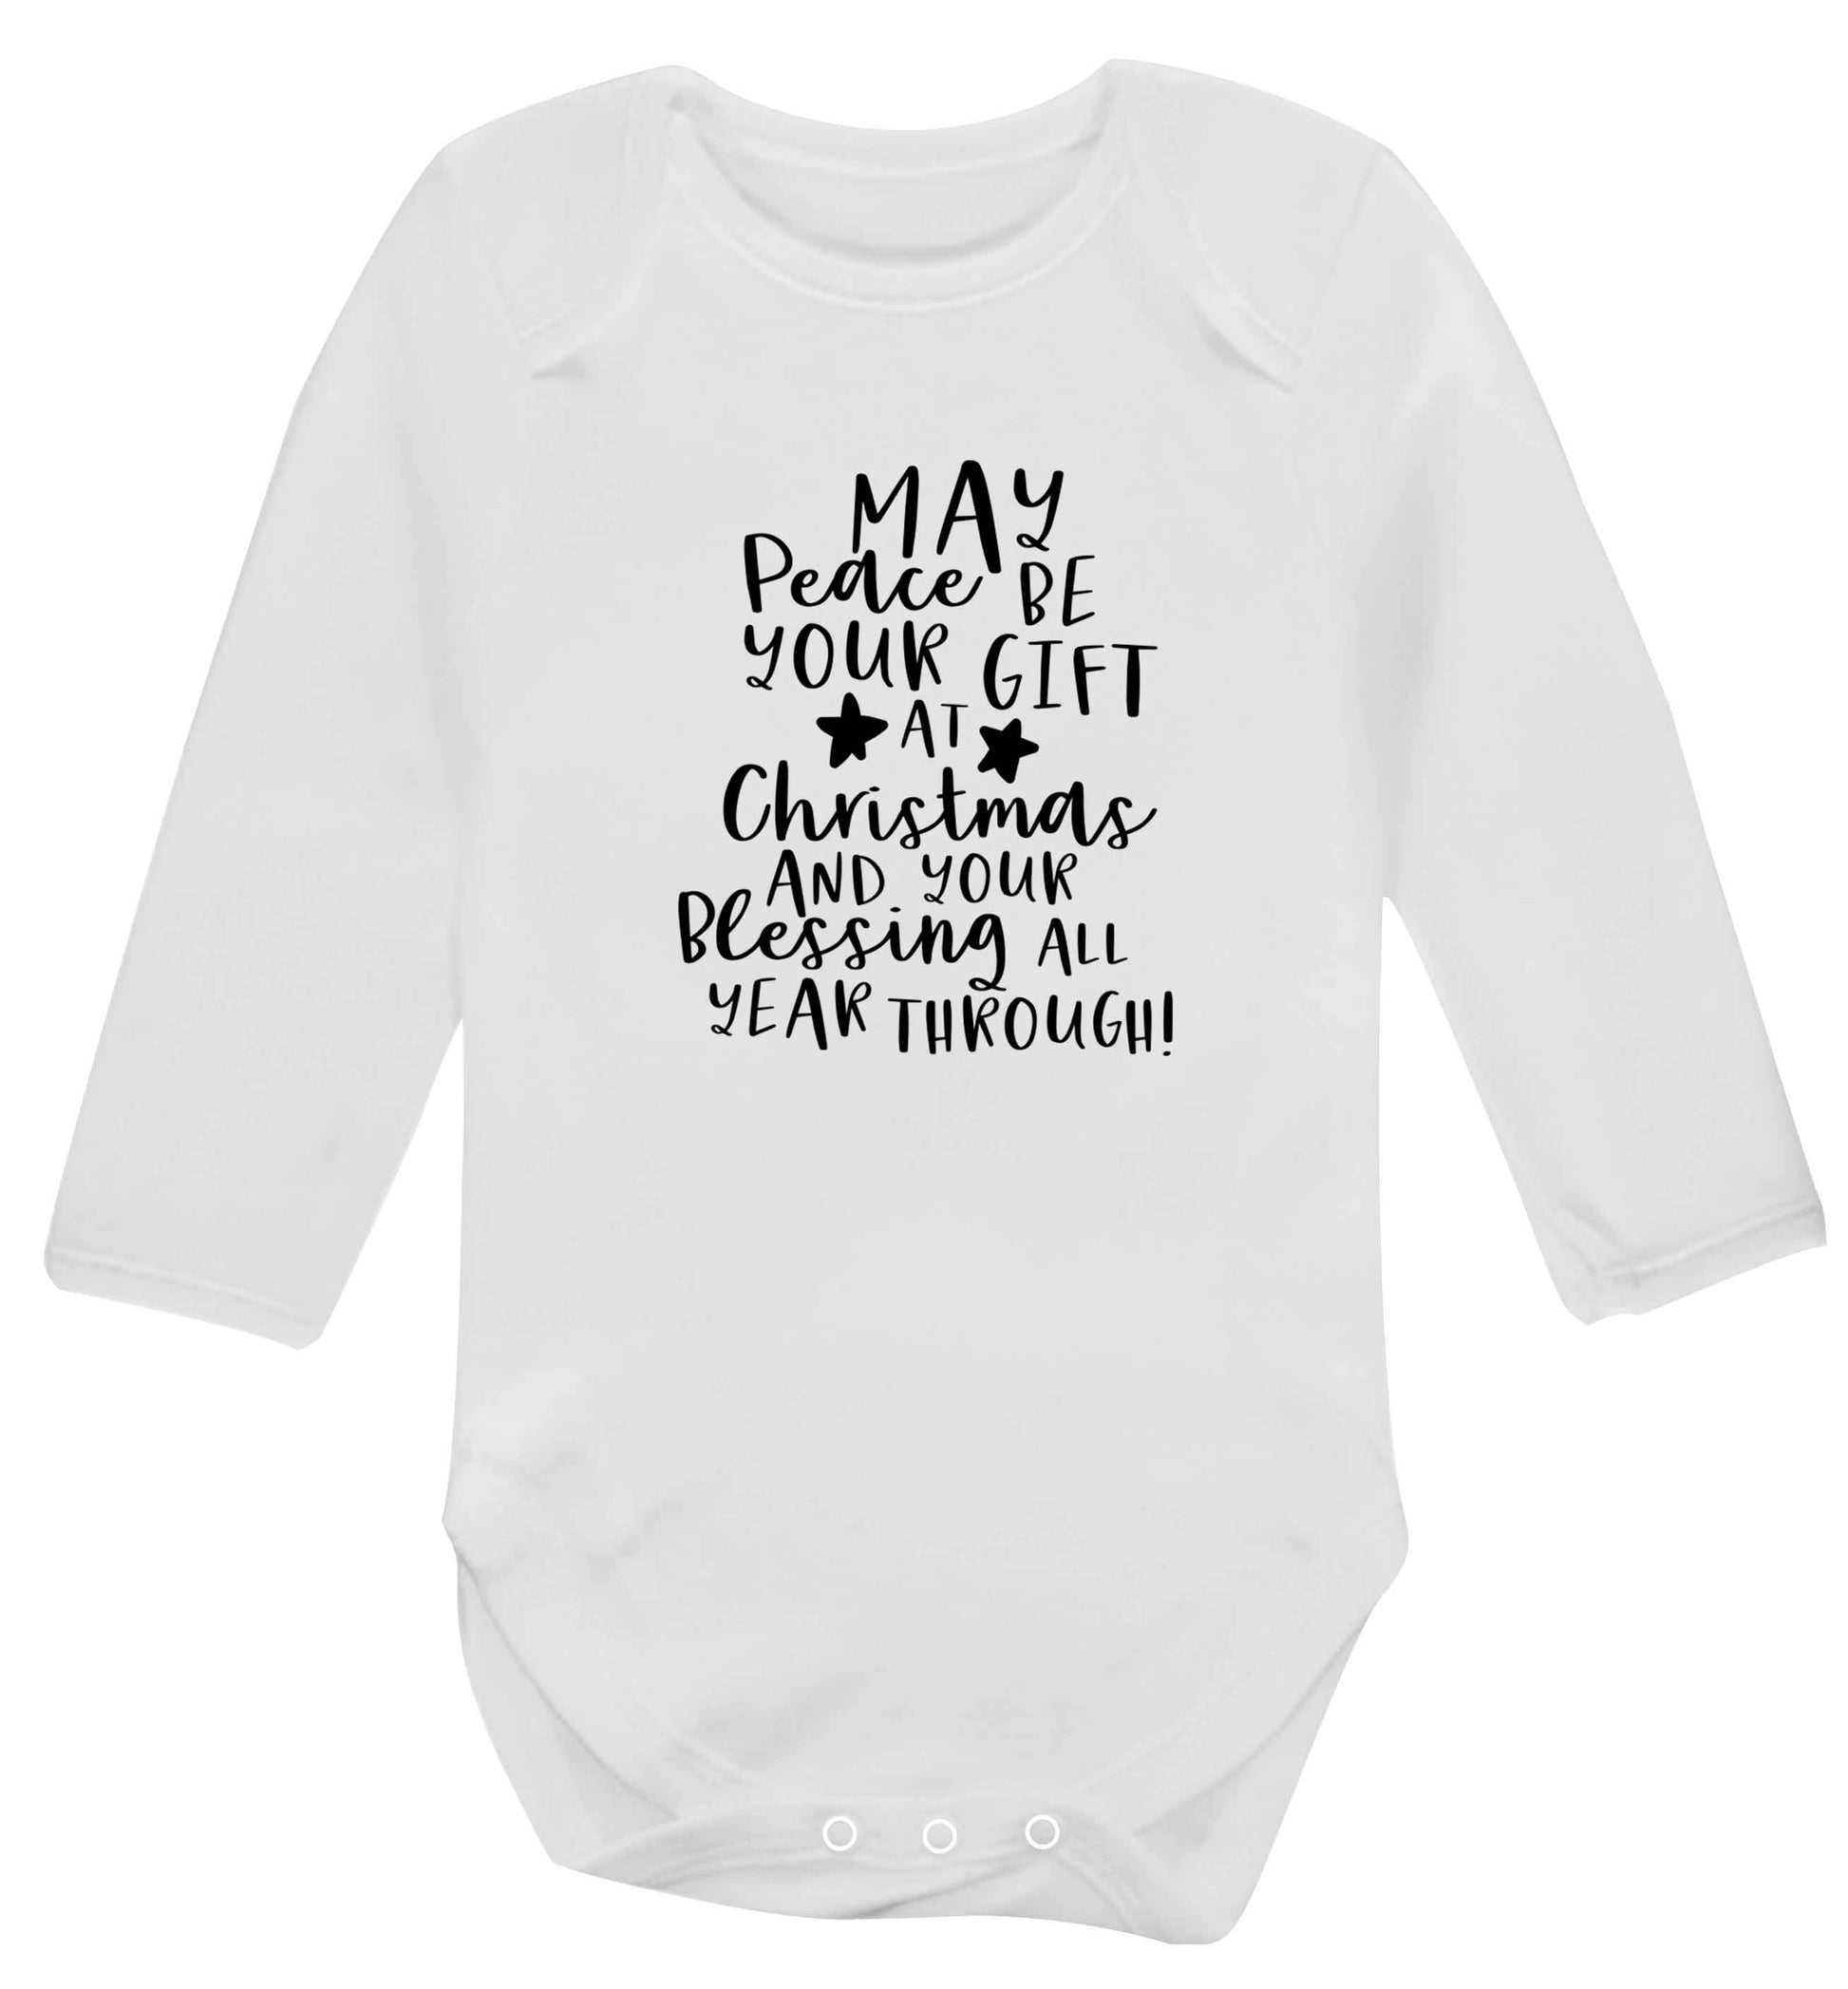 Peace be your Gift at Christmas Gift baby vest long sleeved white 6-12 months